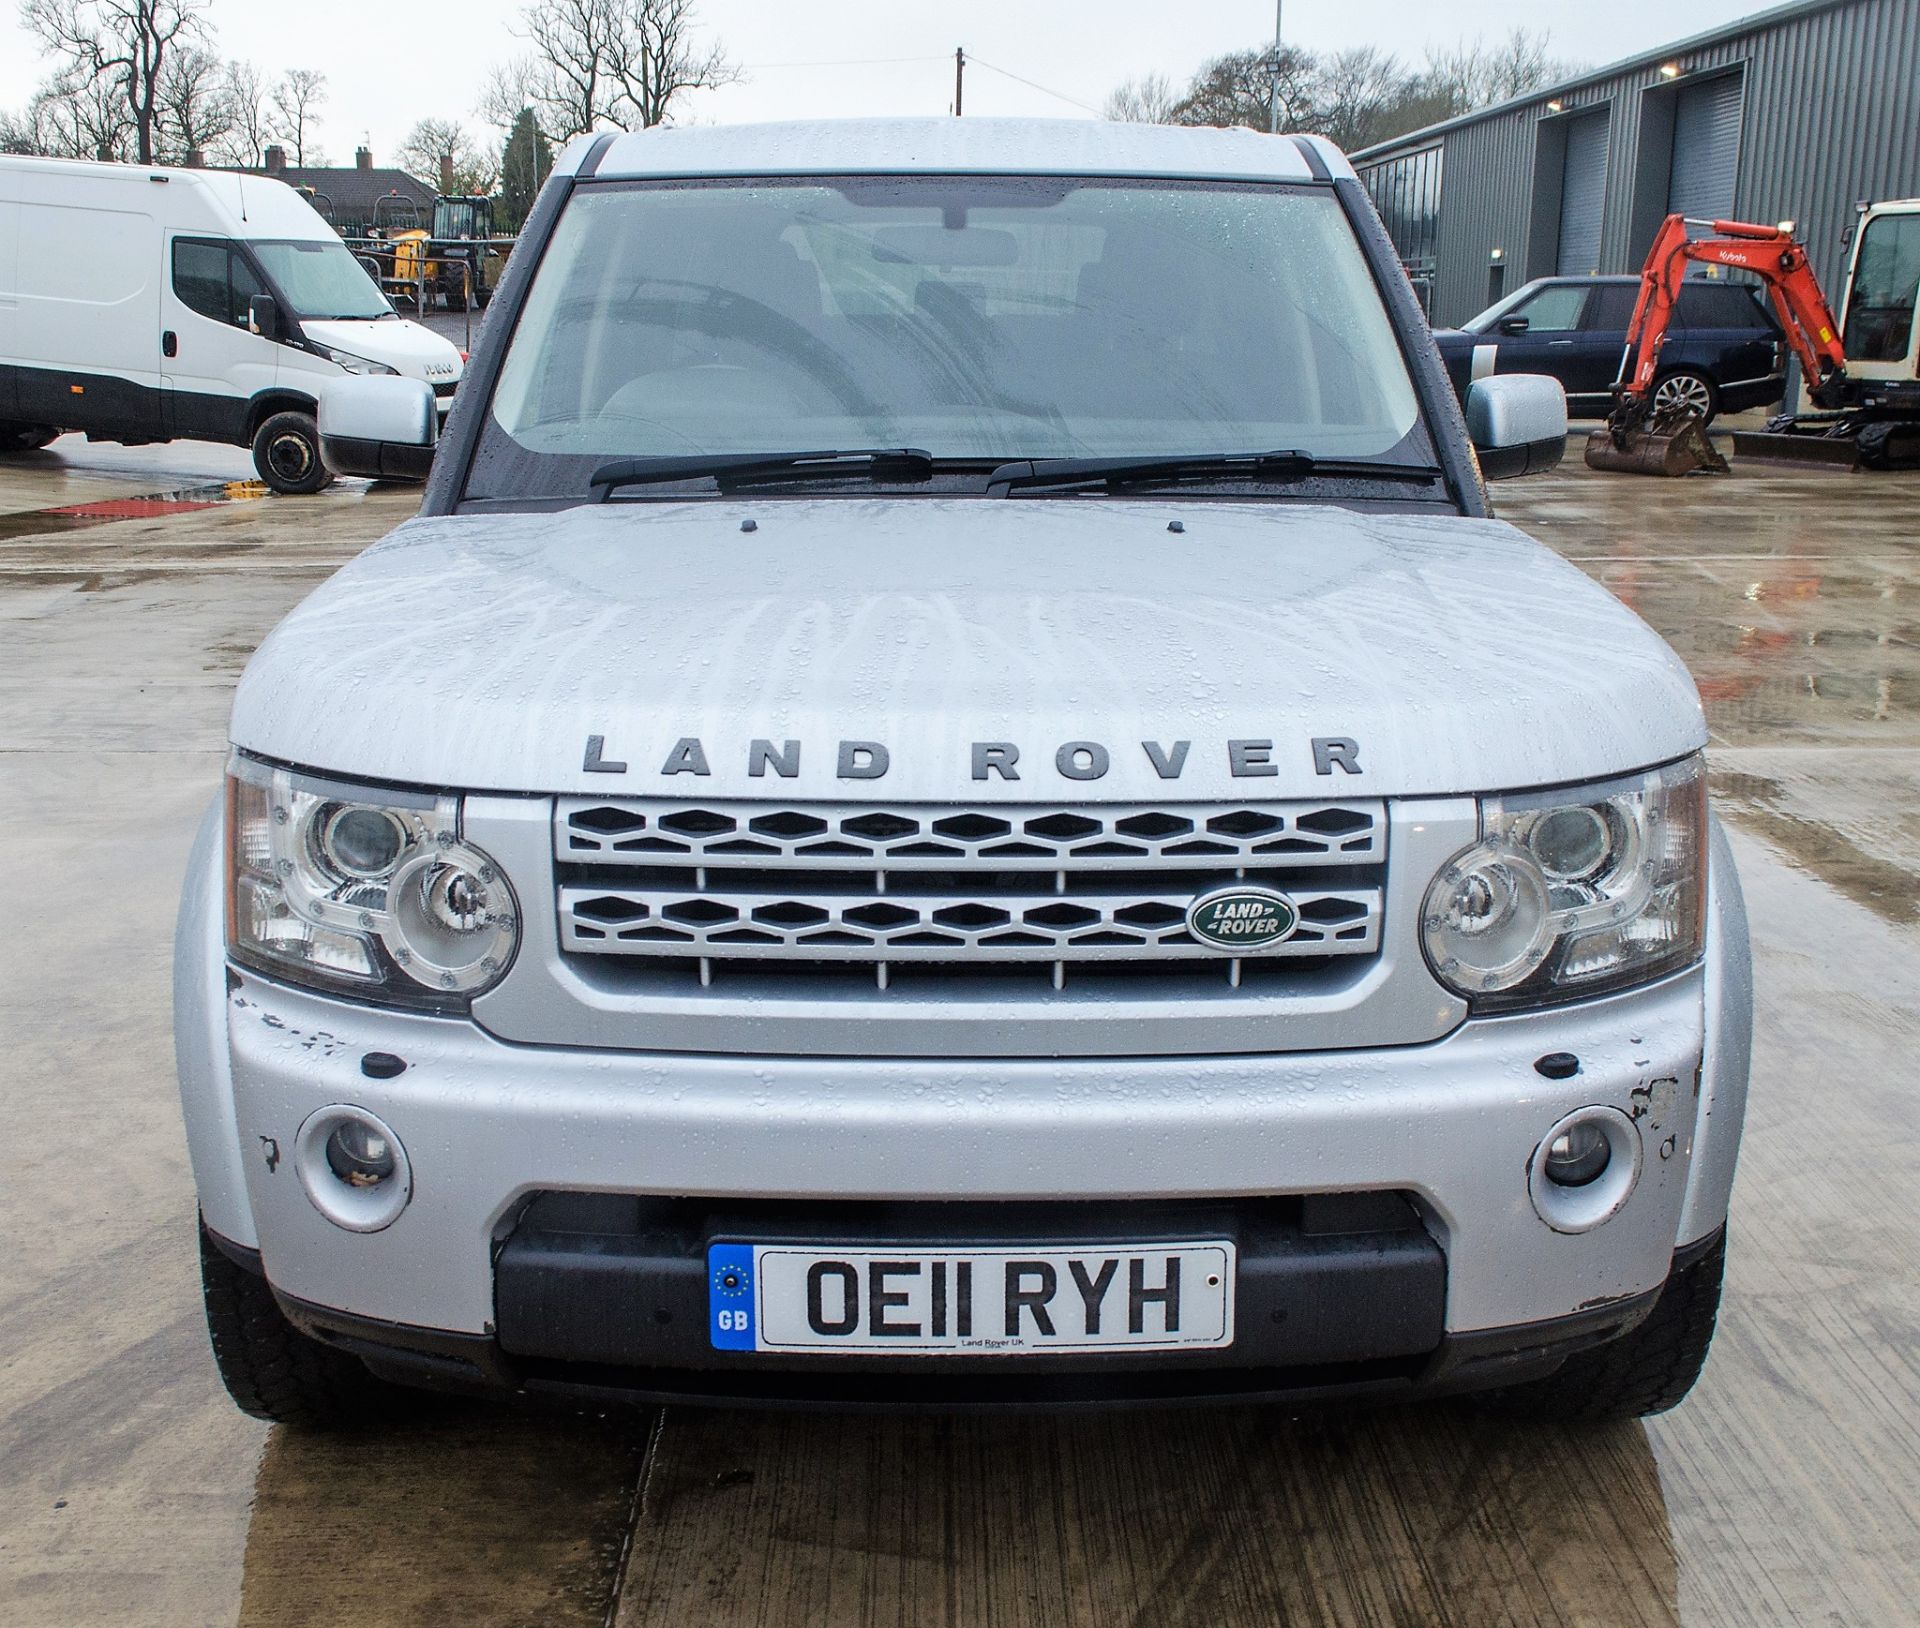 Land Rover Discovery 4 GS 3.0 TDV6 auto 5 door 4wd estate car  Registration Number: OE 11 RYH - Image 5 of 28